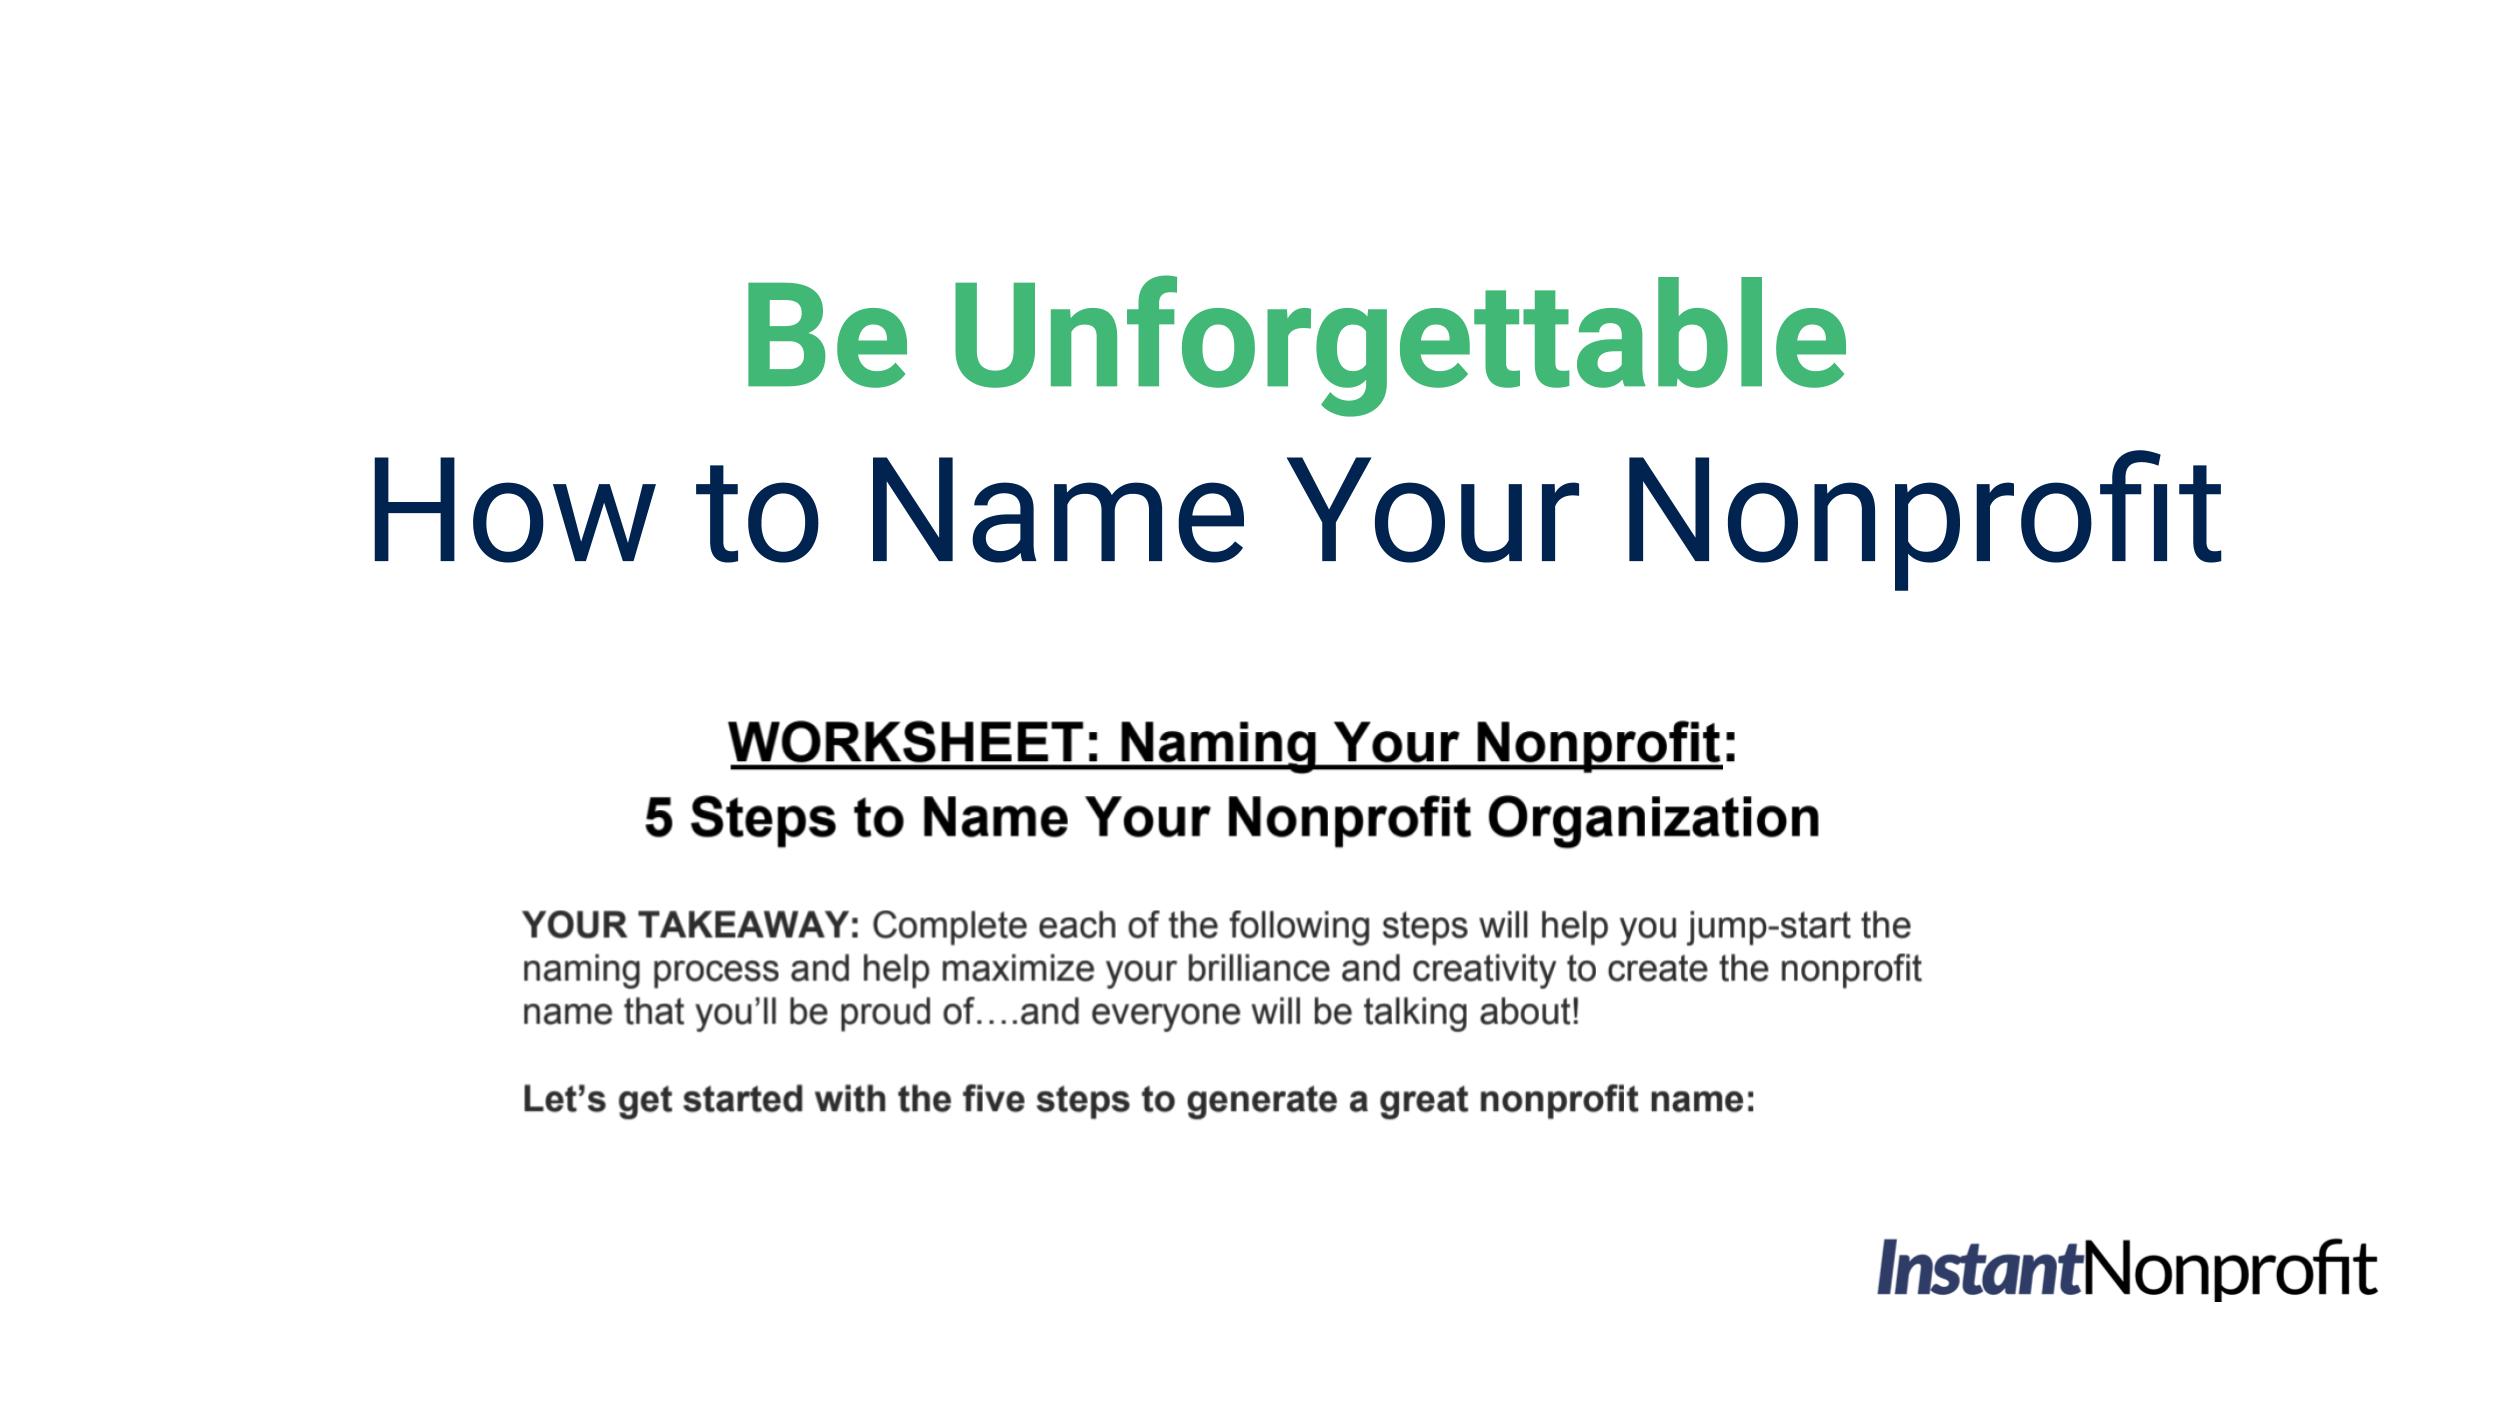 How to Name Your Nonprofit